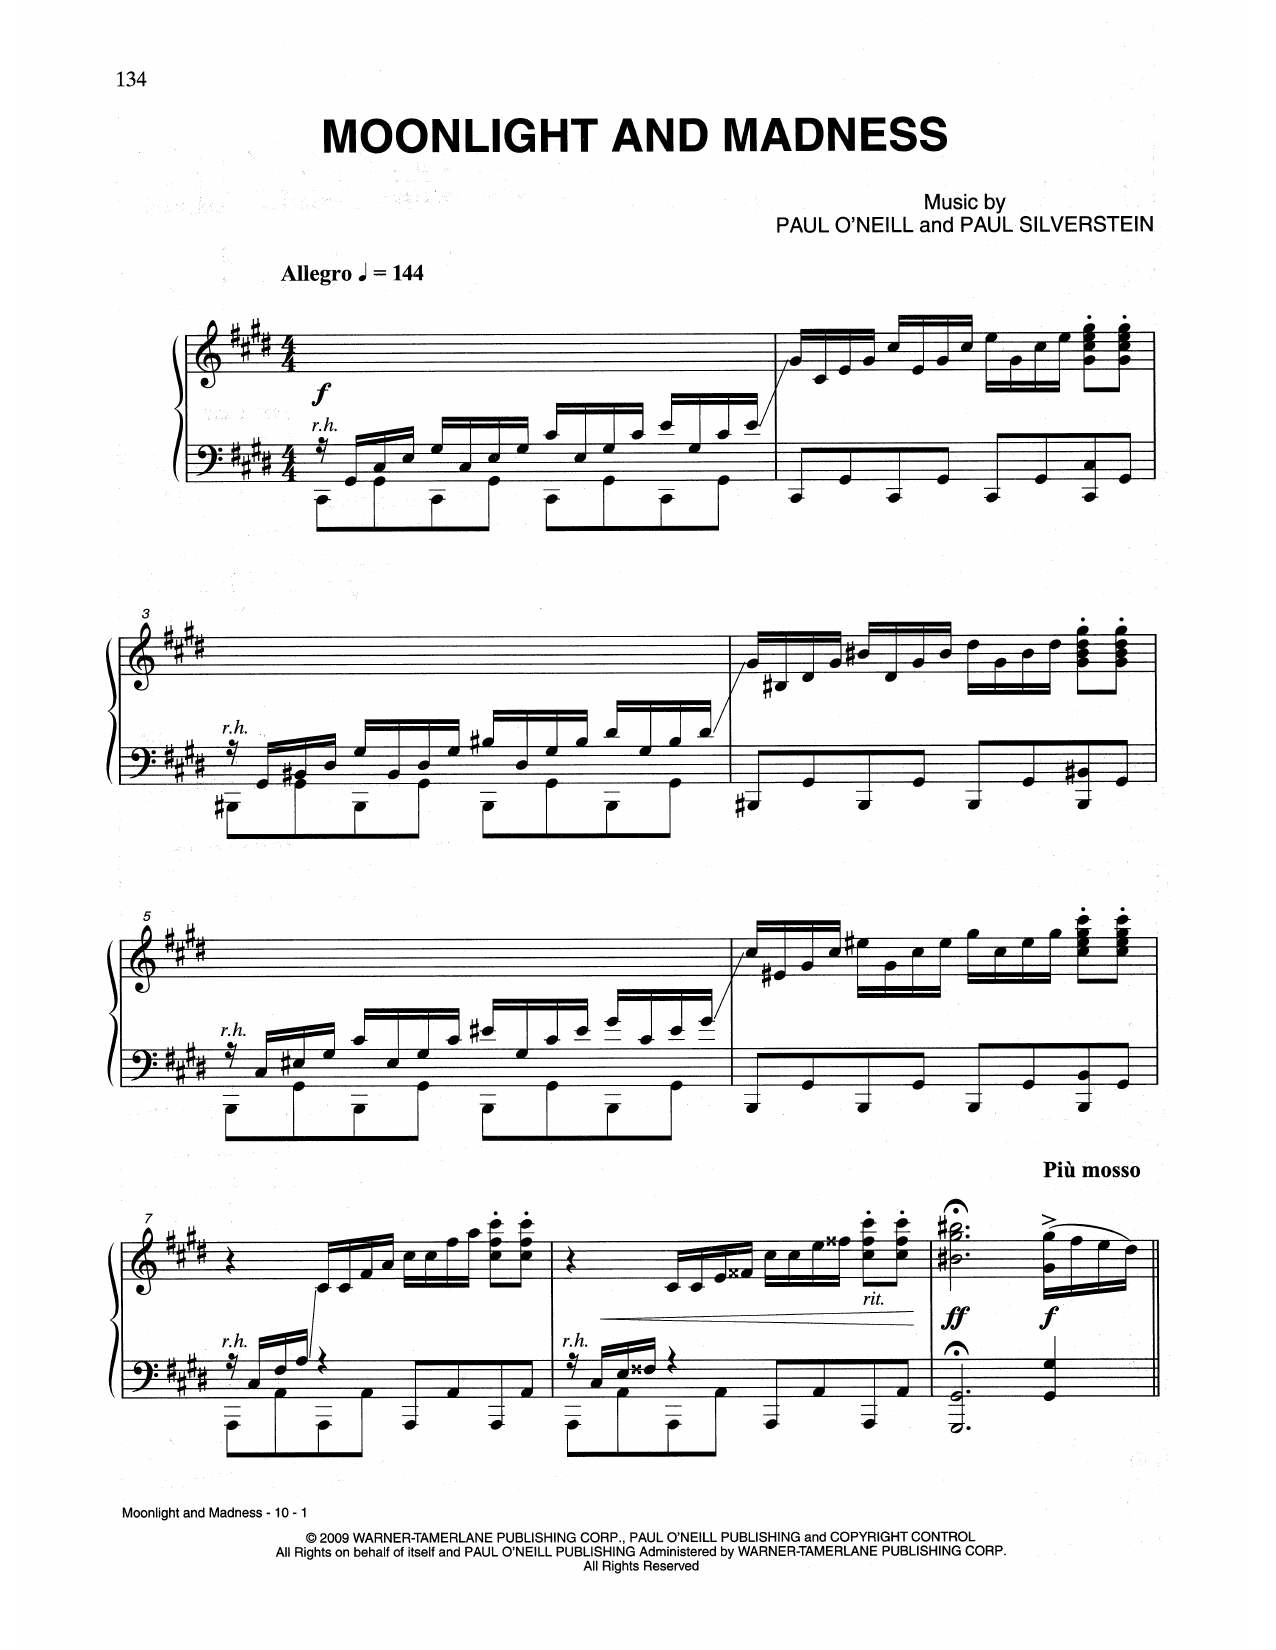 Download Trans-Siberian Orchestra Moonlight And Madness Sheet Music